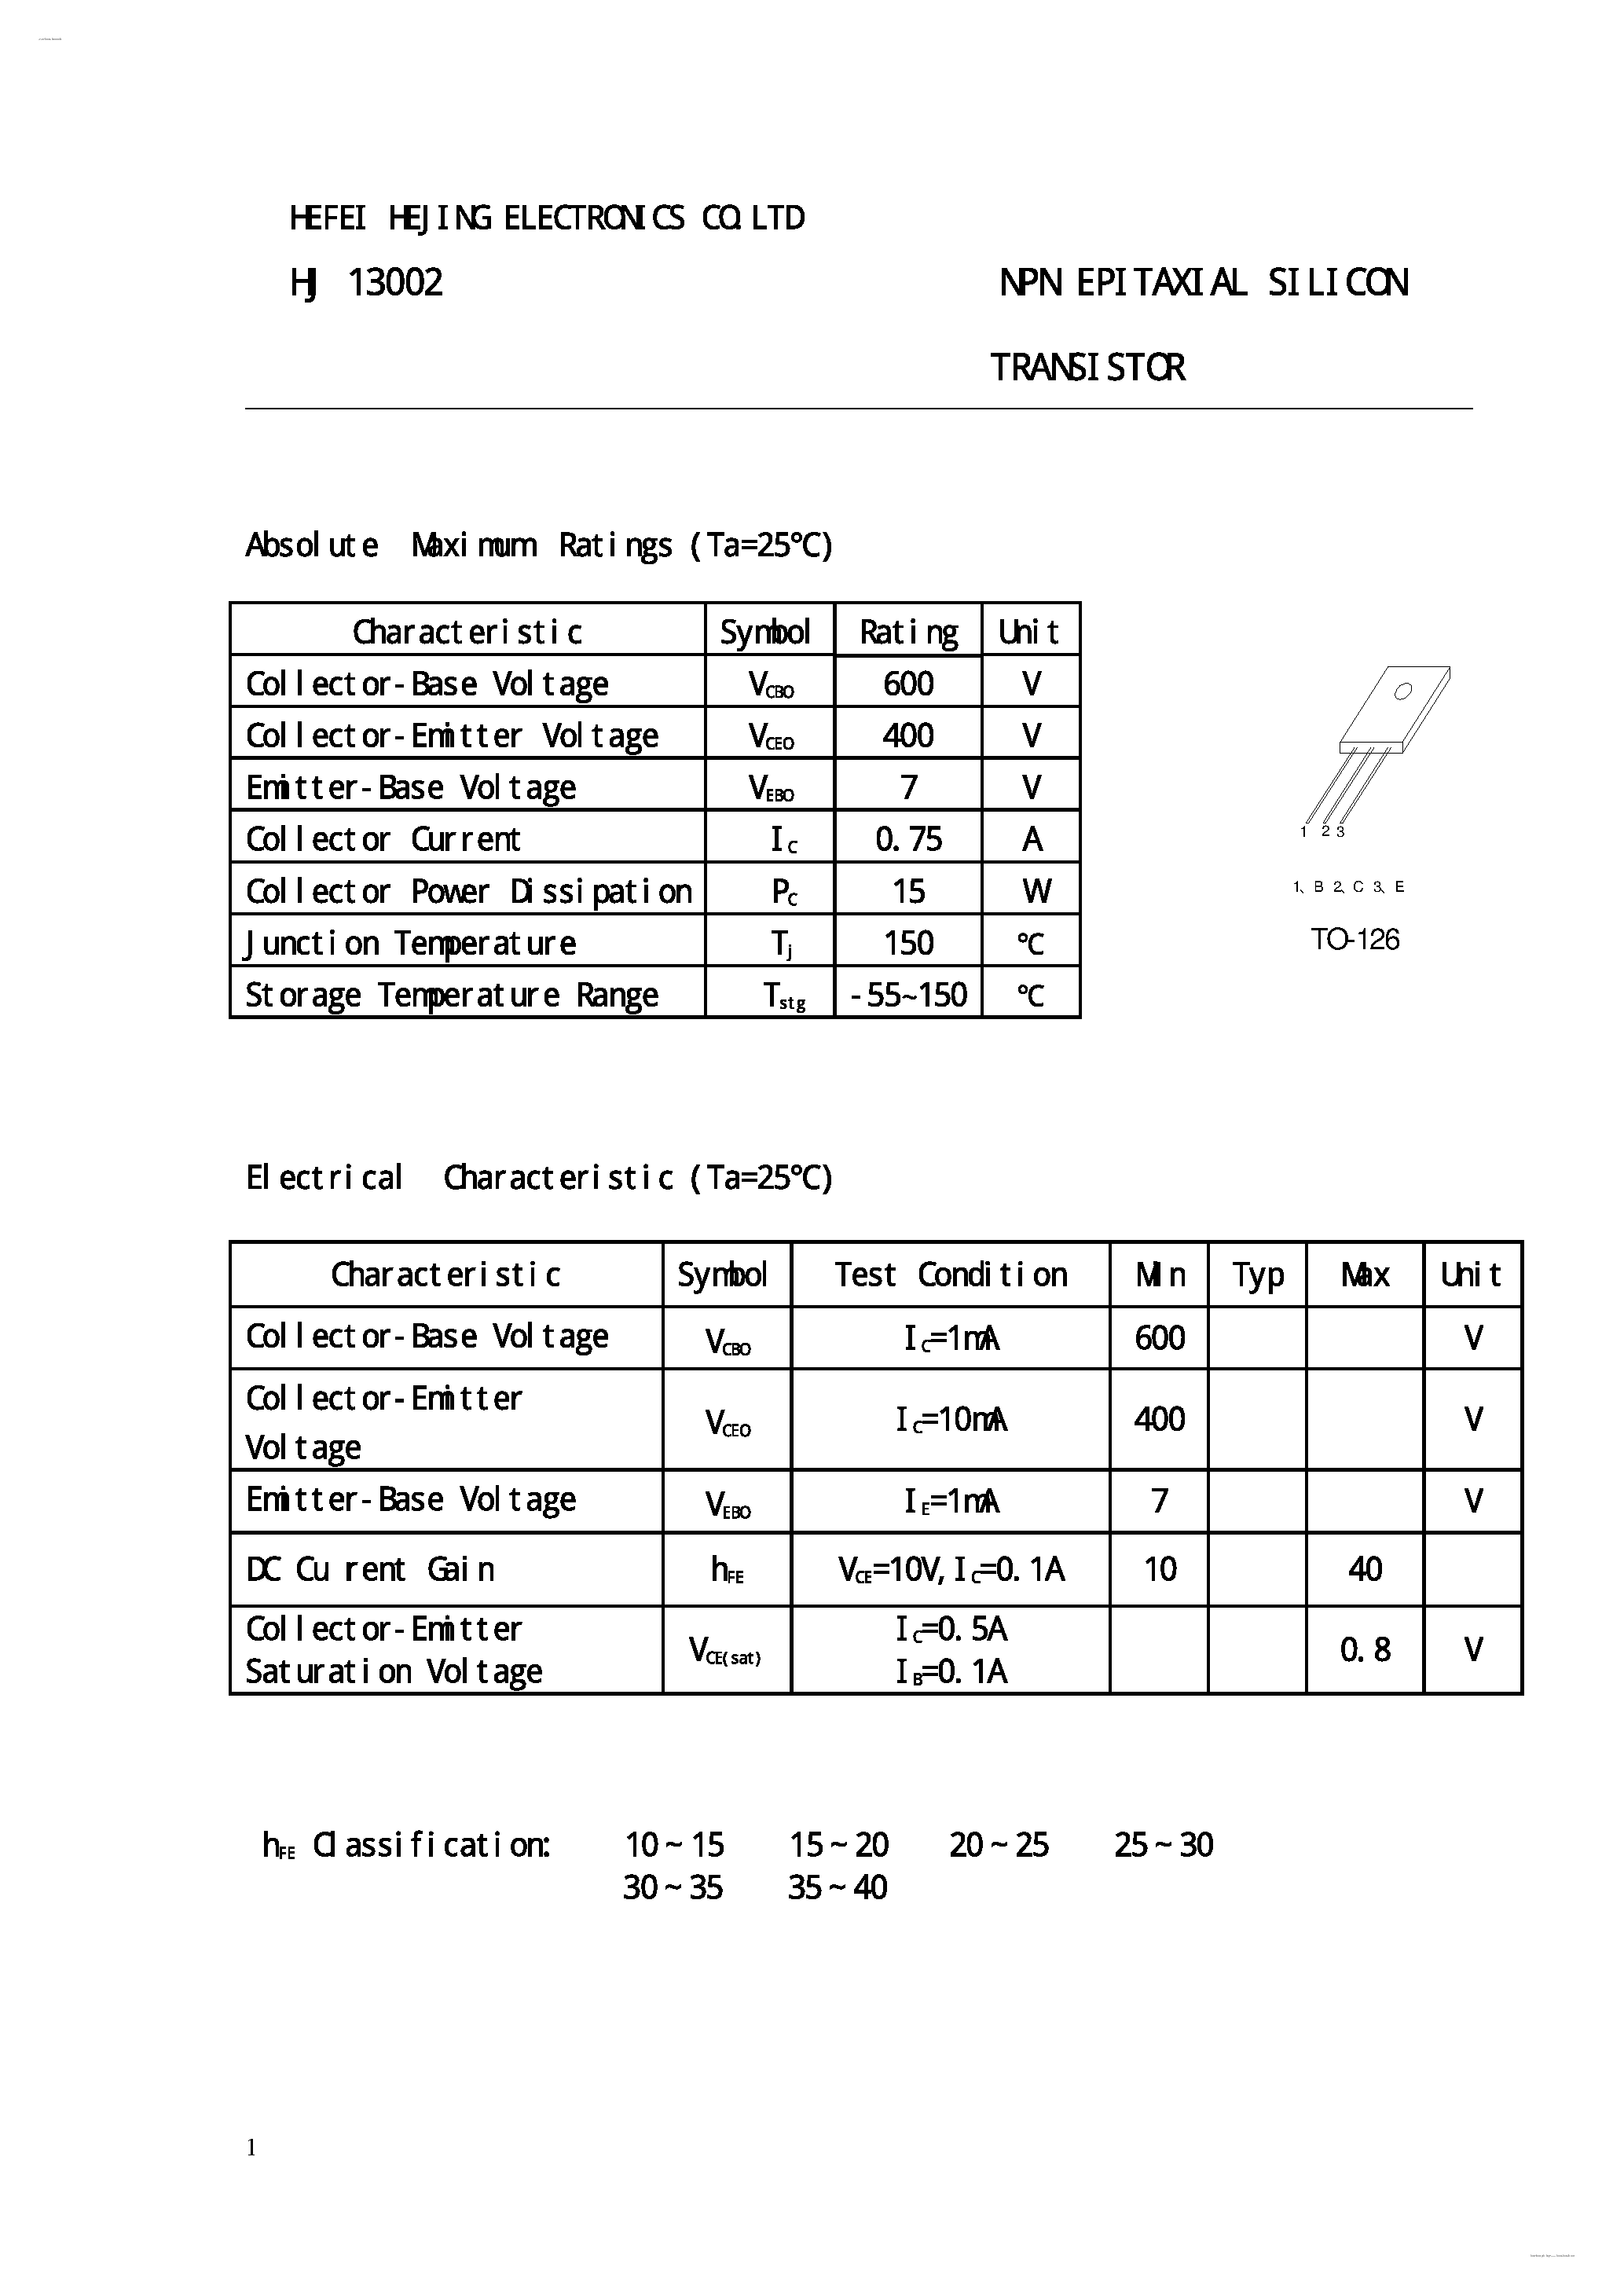 Datasheet HJ13002 - NPN Epitaxial Silicon Transistor page 1